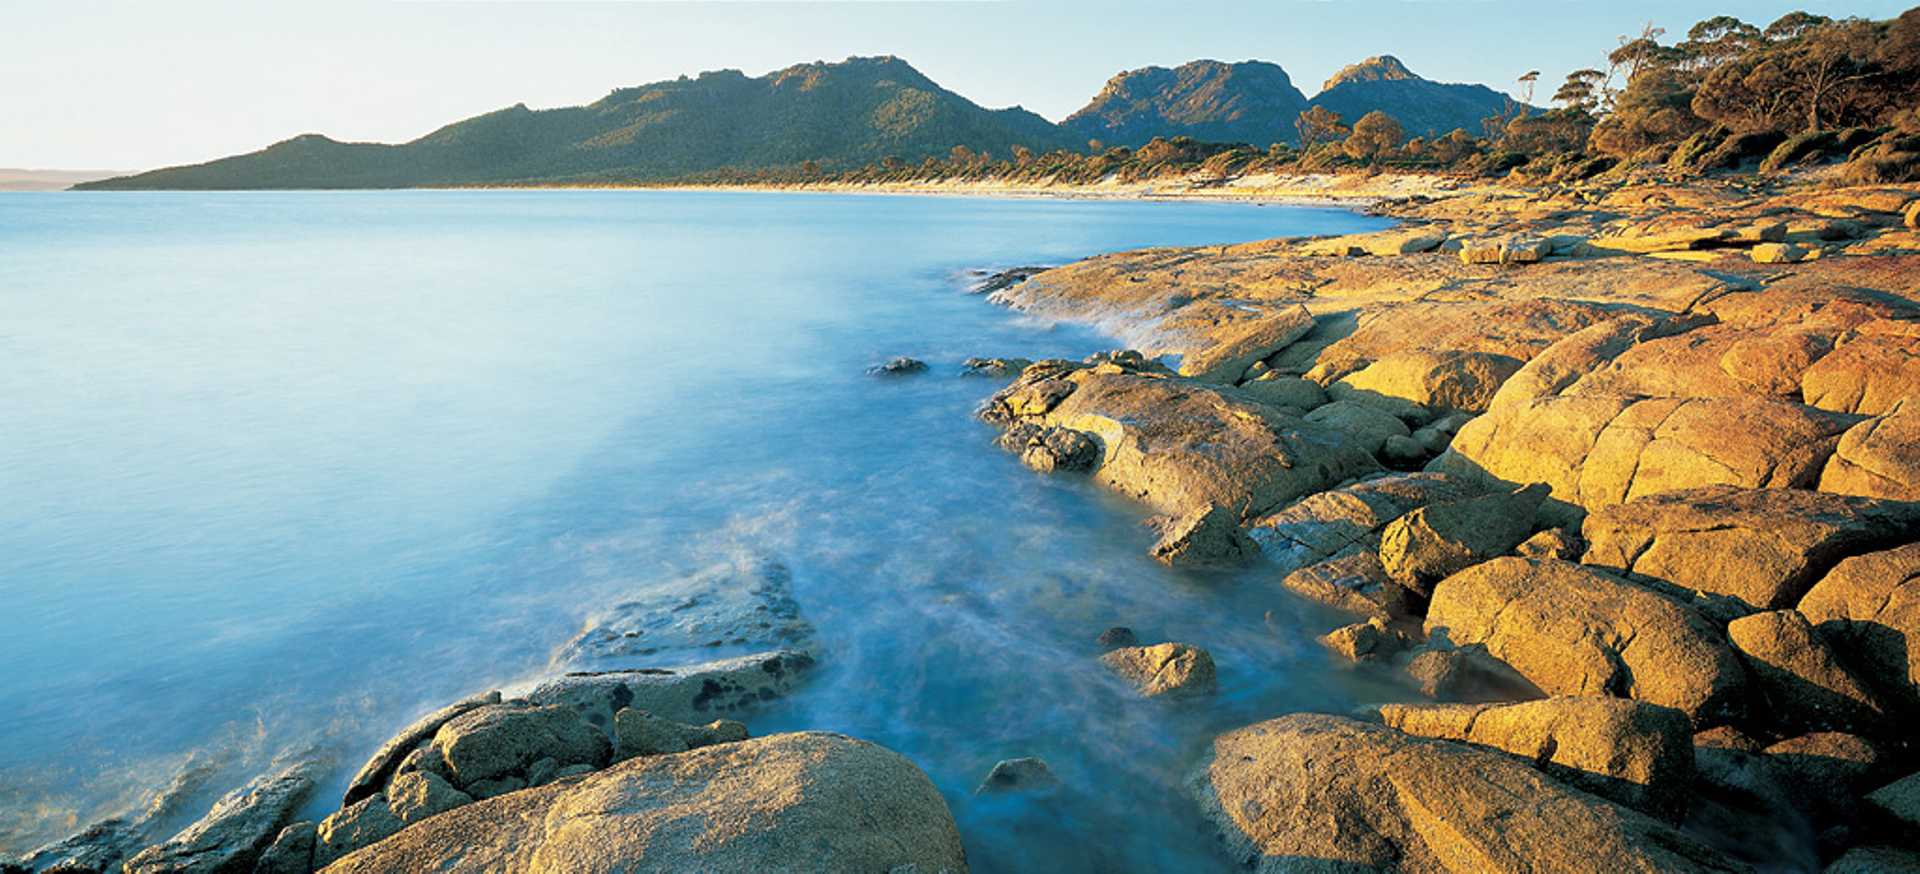 Four Day Freycinet Accommodation and Tour Package